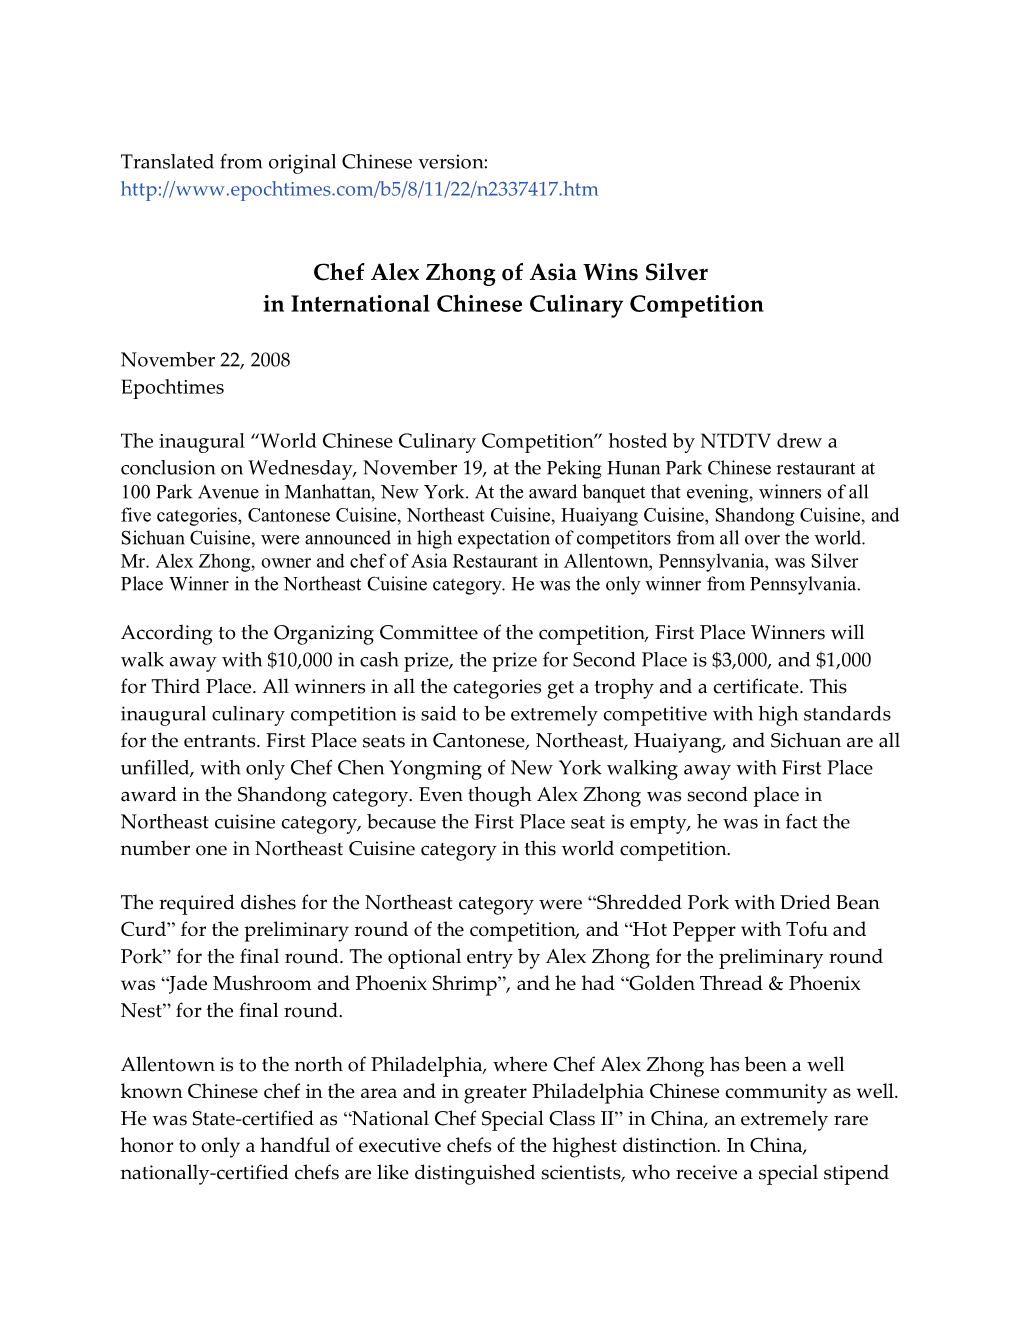 Chef Alex Zhong of Asia Wins Silver in International Chinese Culinary Competition